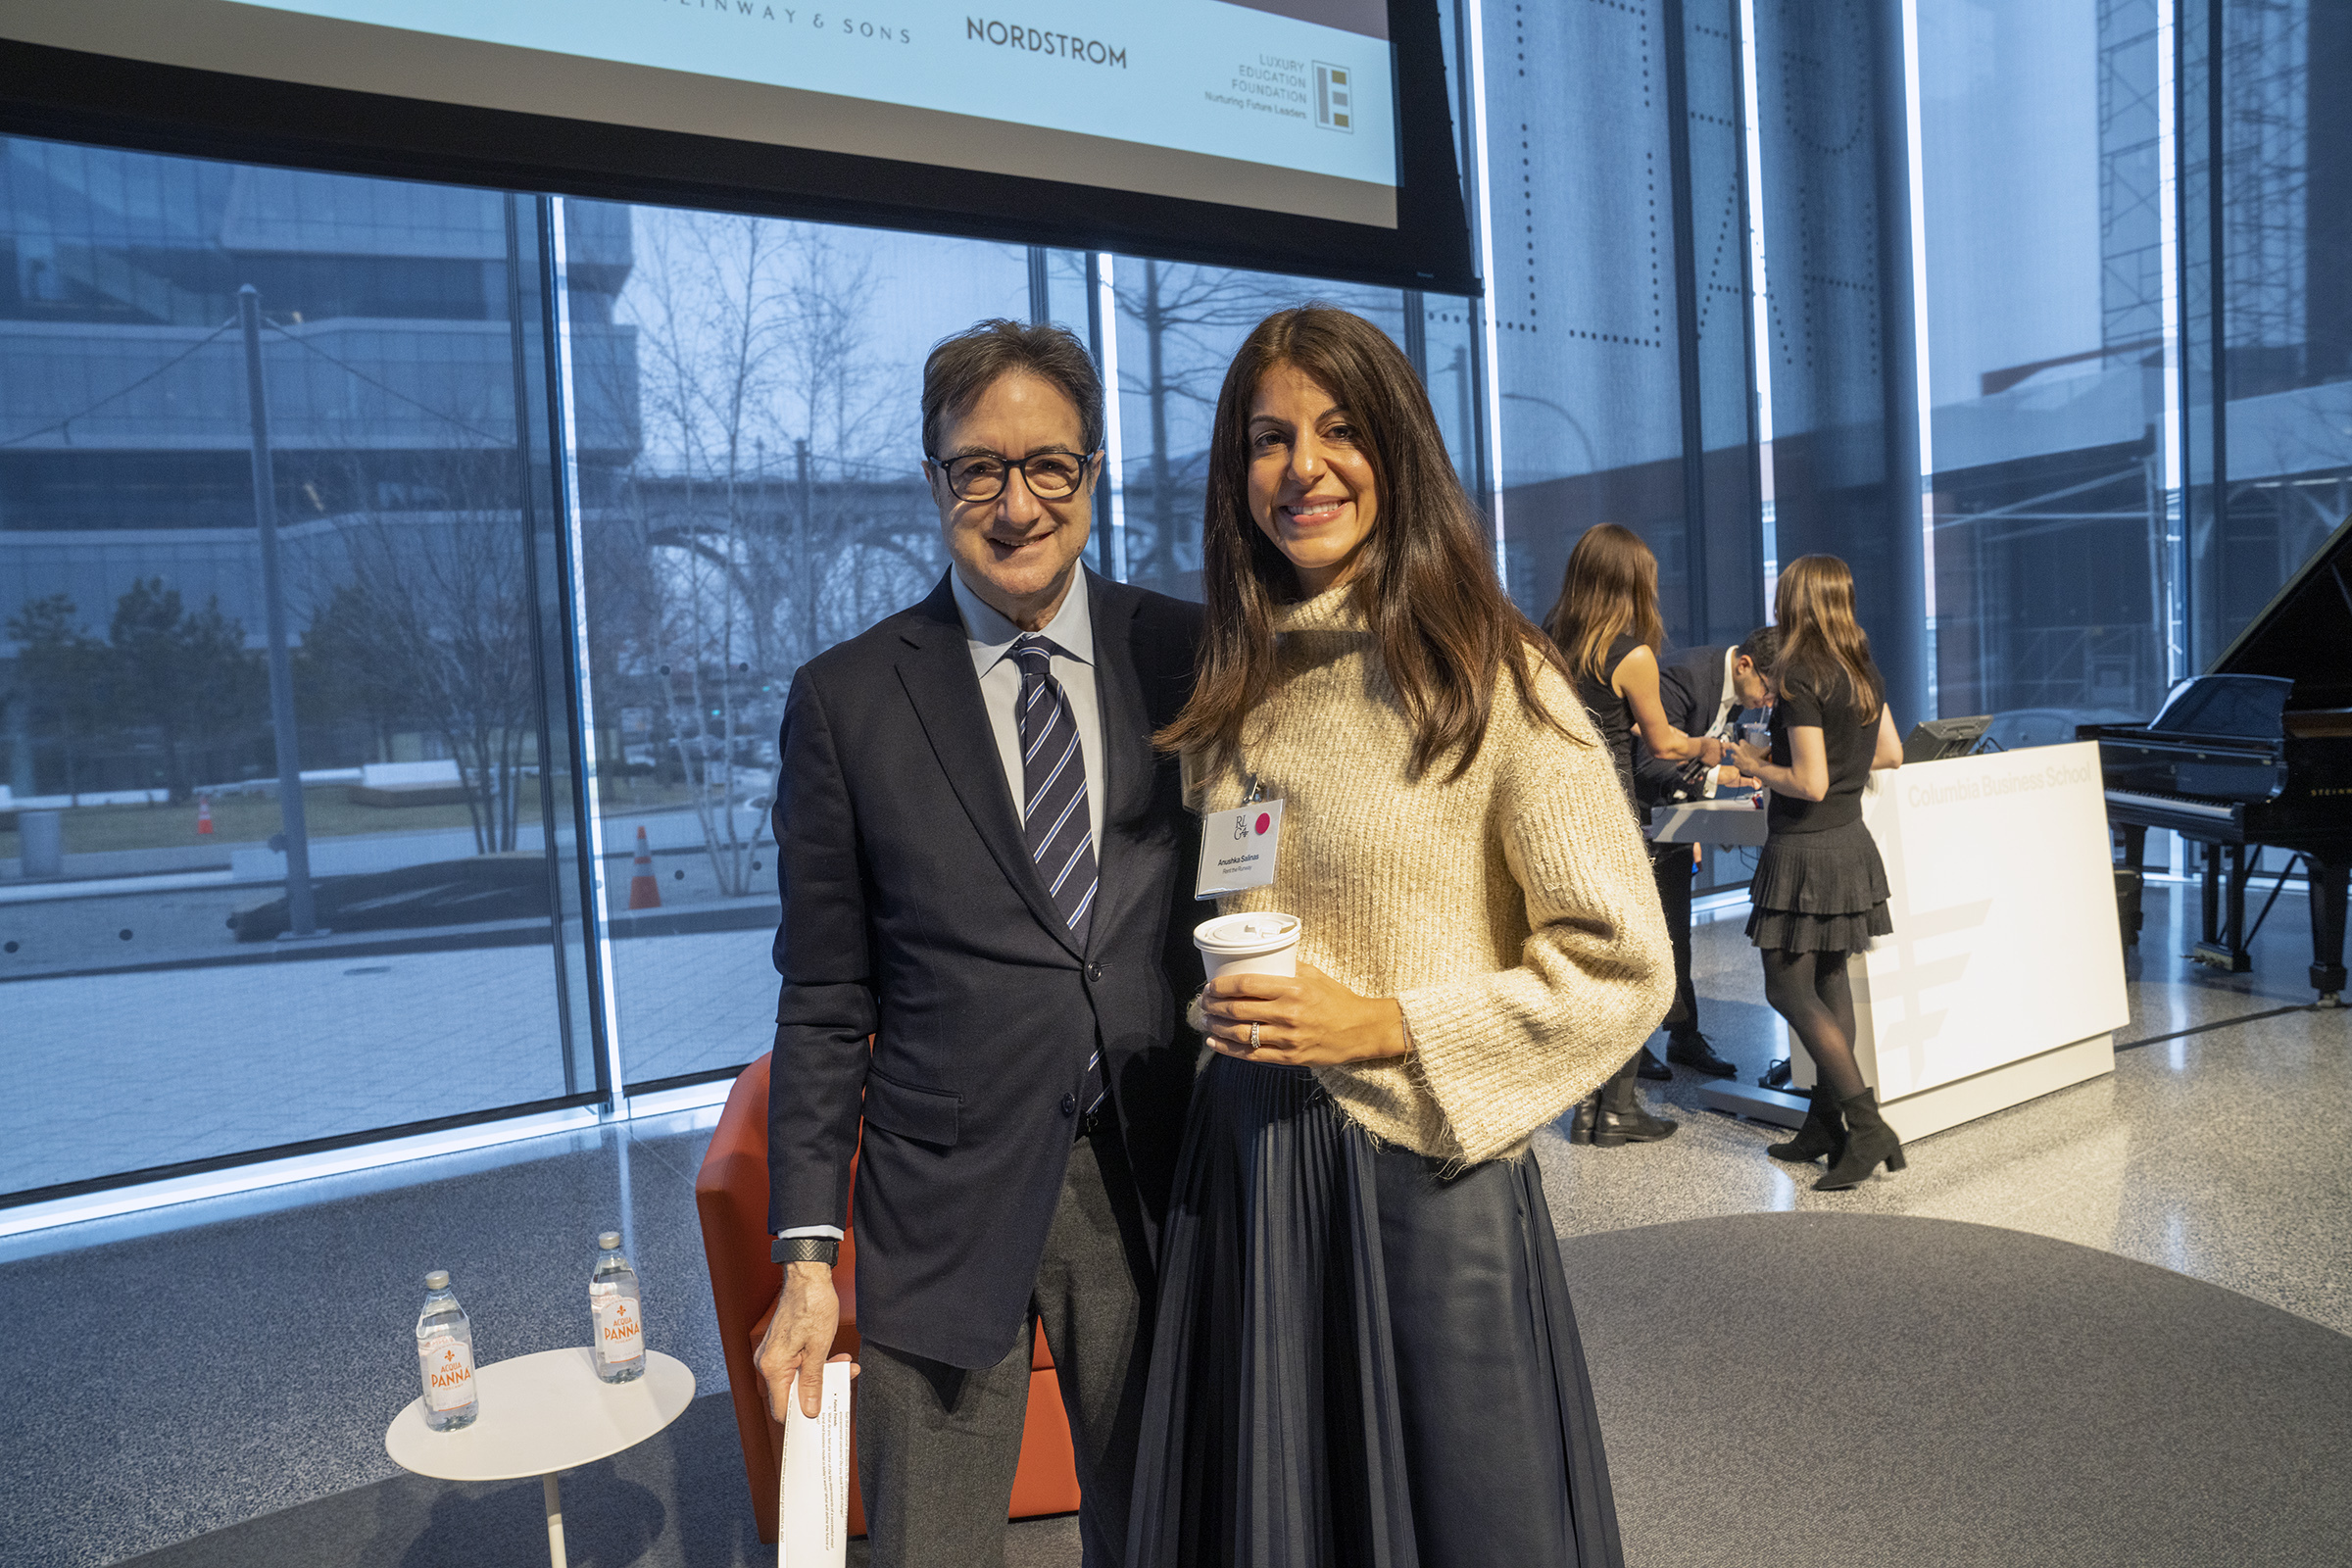 Professor Mark A. Cohen, left, with Anushka Salinas ’10, president and COO of Rent the Runway